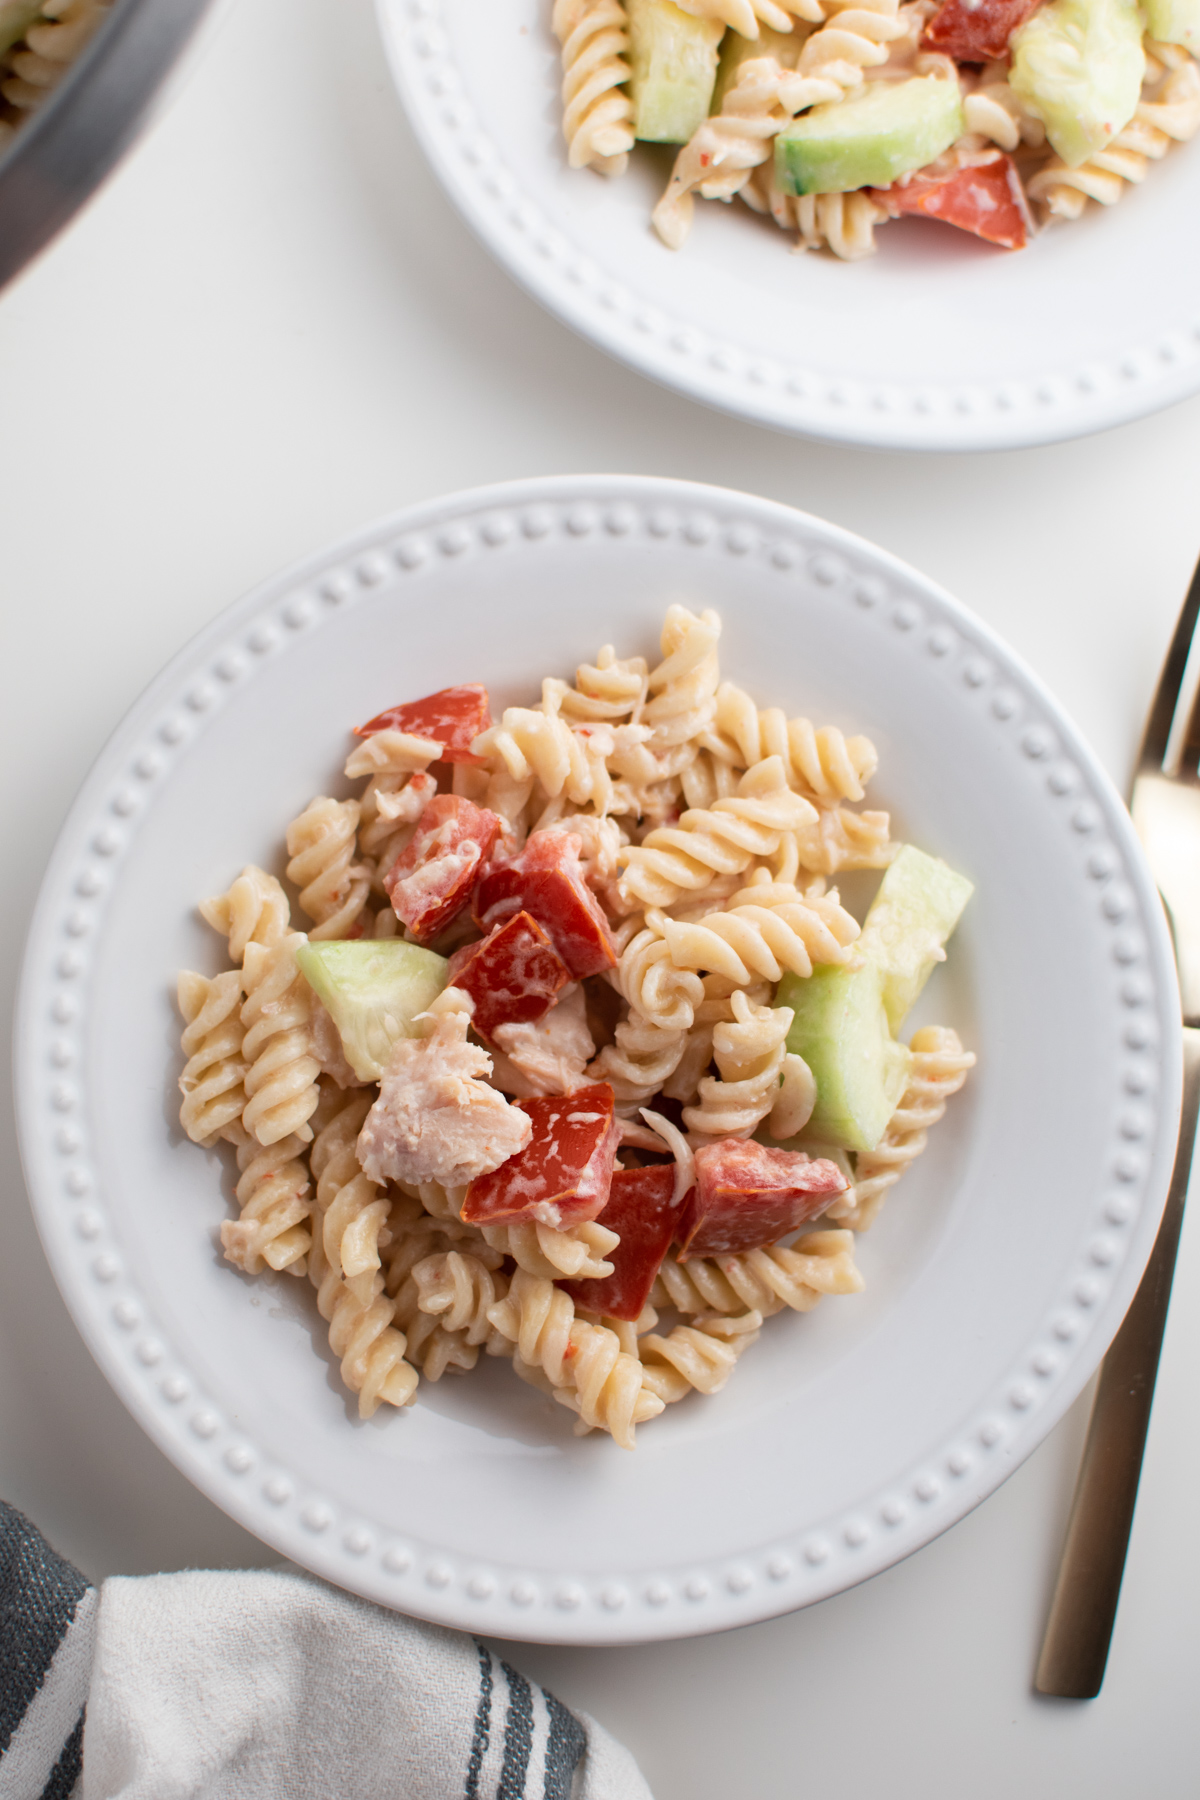 Rotini pasta salad on white dinner plates with gold fork and kitchen towel.